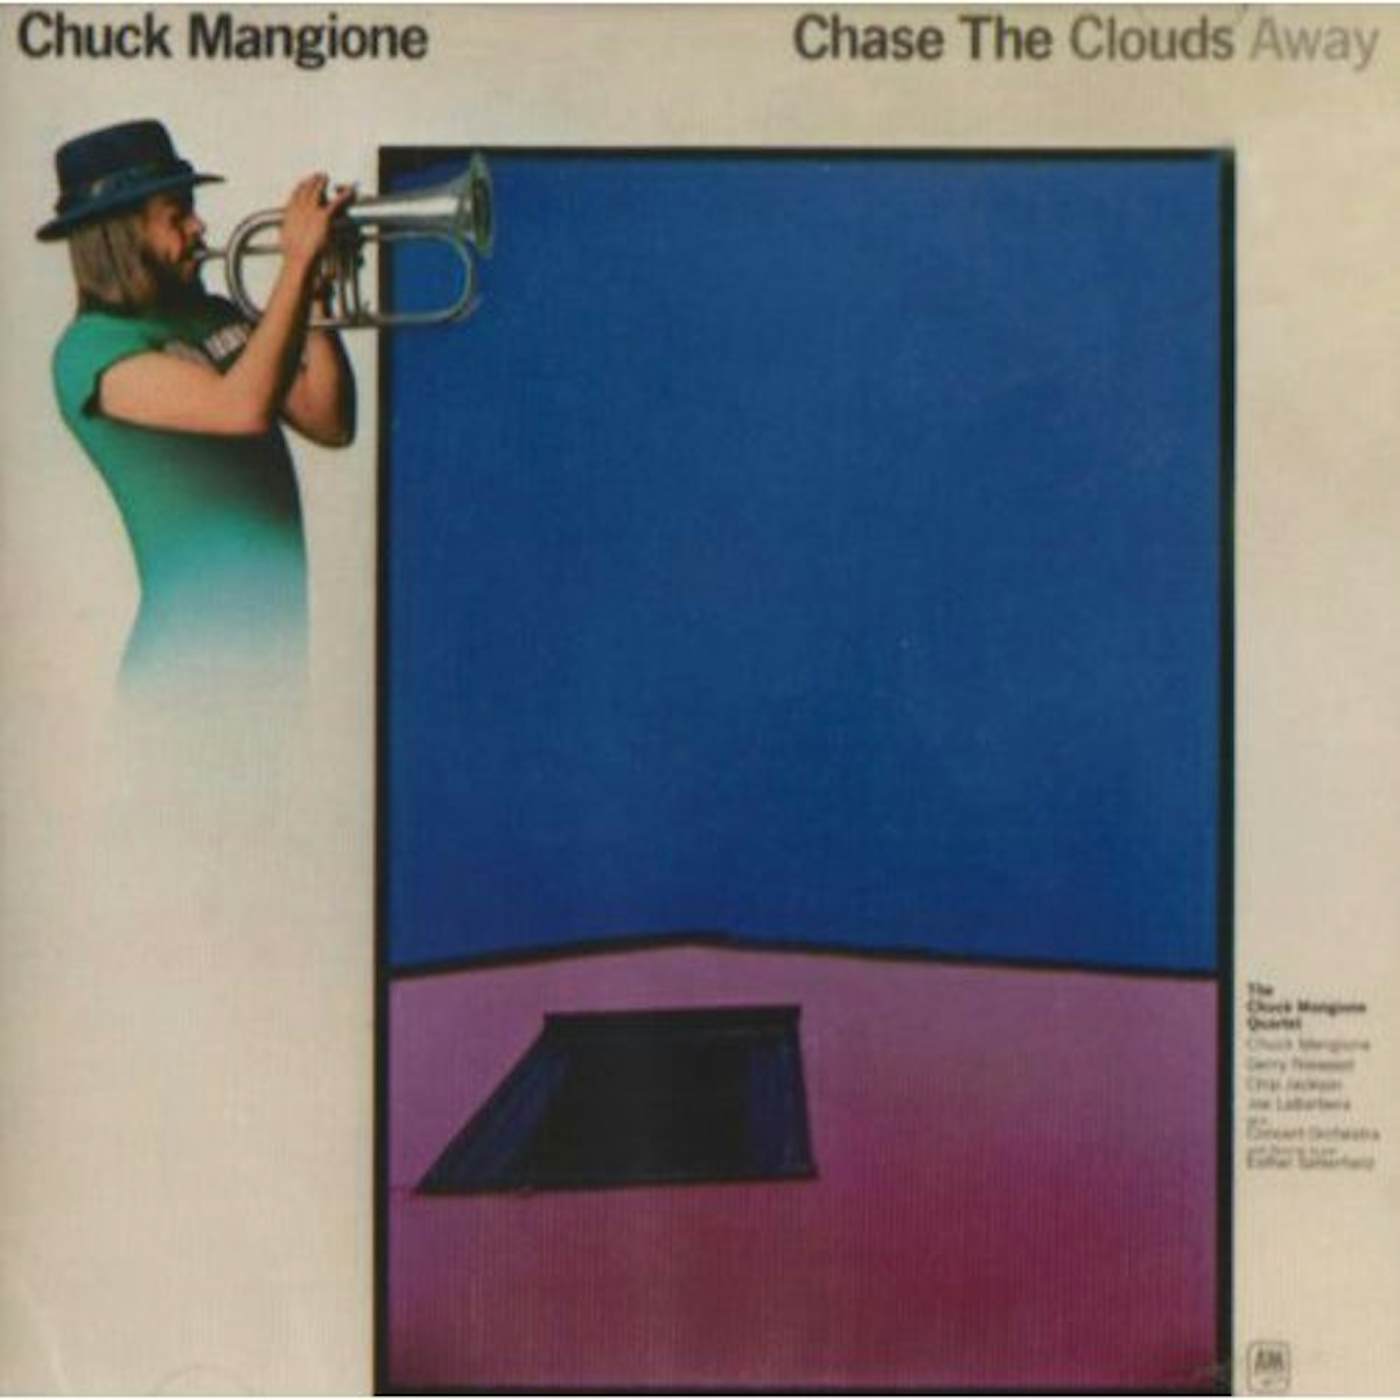 Chuck Mangione CHASE THE CLOUDS AWAY CD